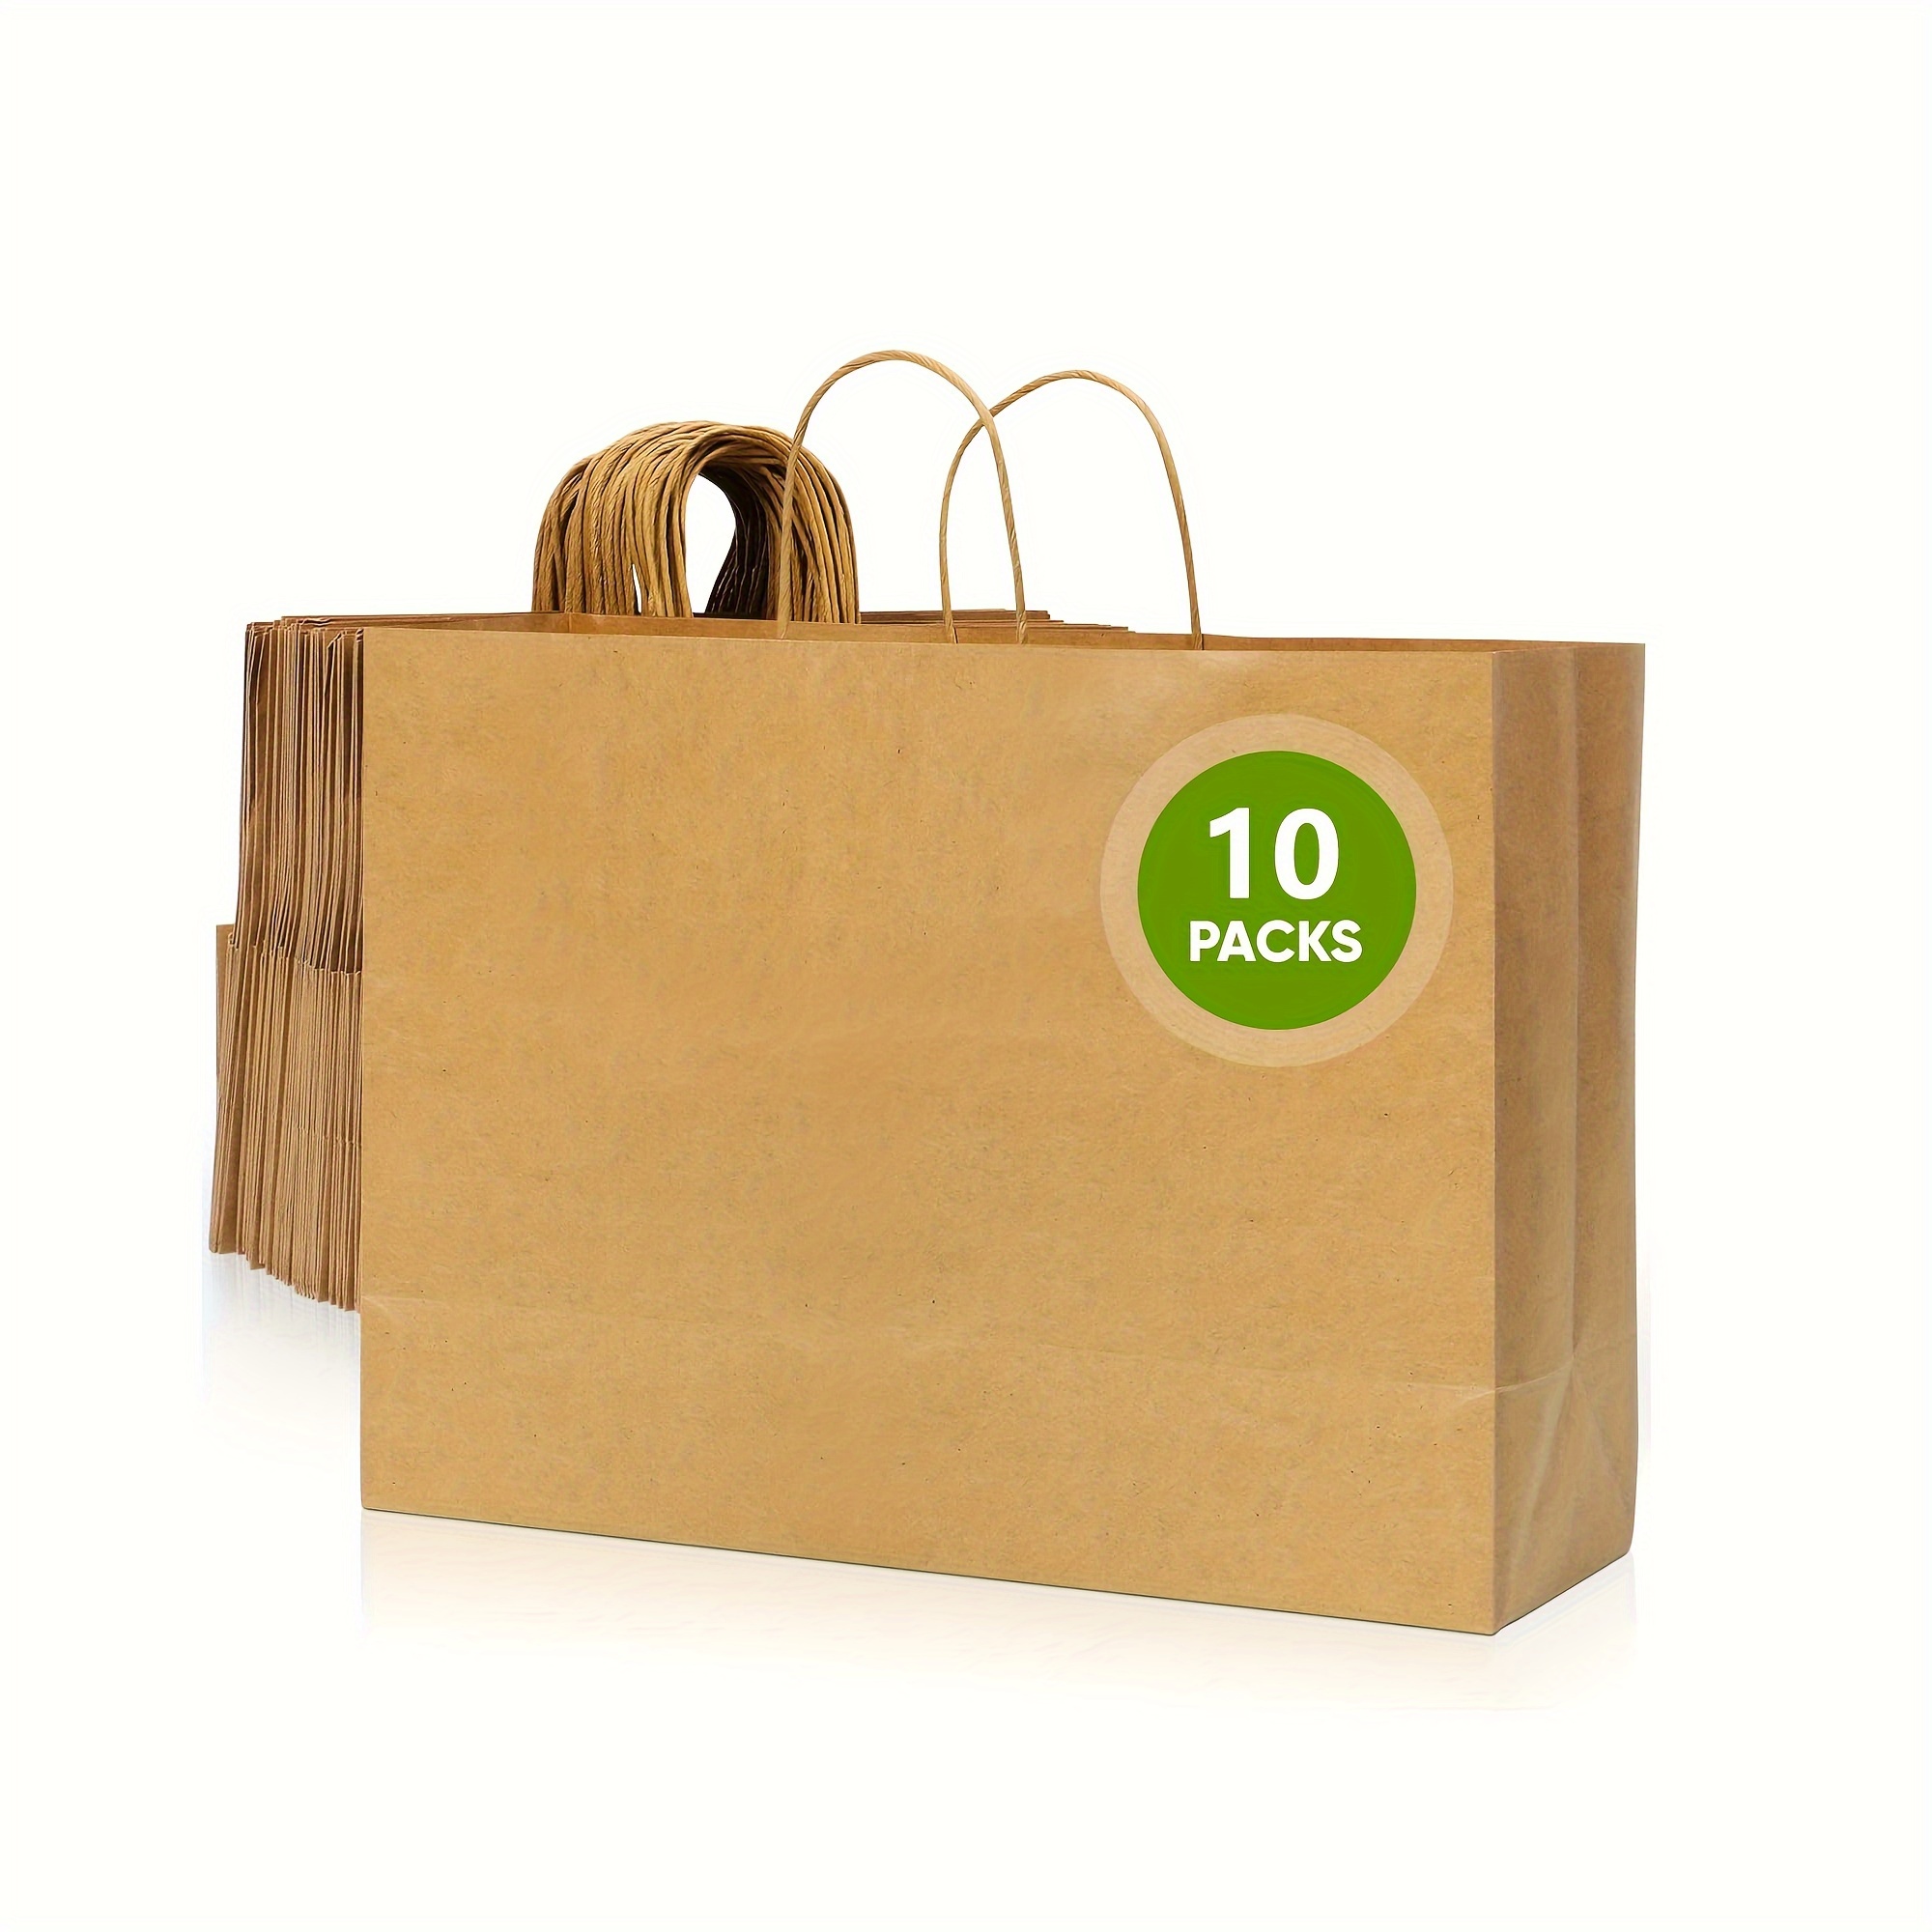 10/20pcs Brown Kraft Paper Bags with Handles Bulk Small Paper Gift Bags for  Small Business Shopping Bags Xmas Party Favor Bags - AliExpress